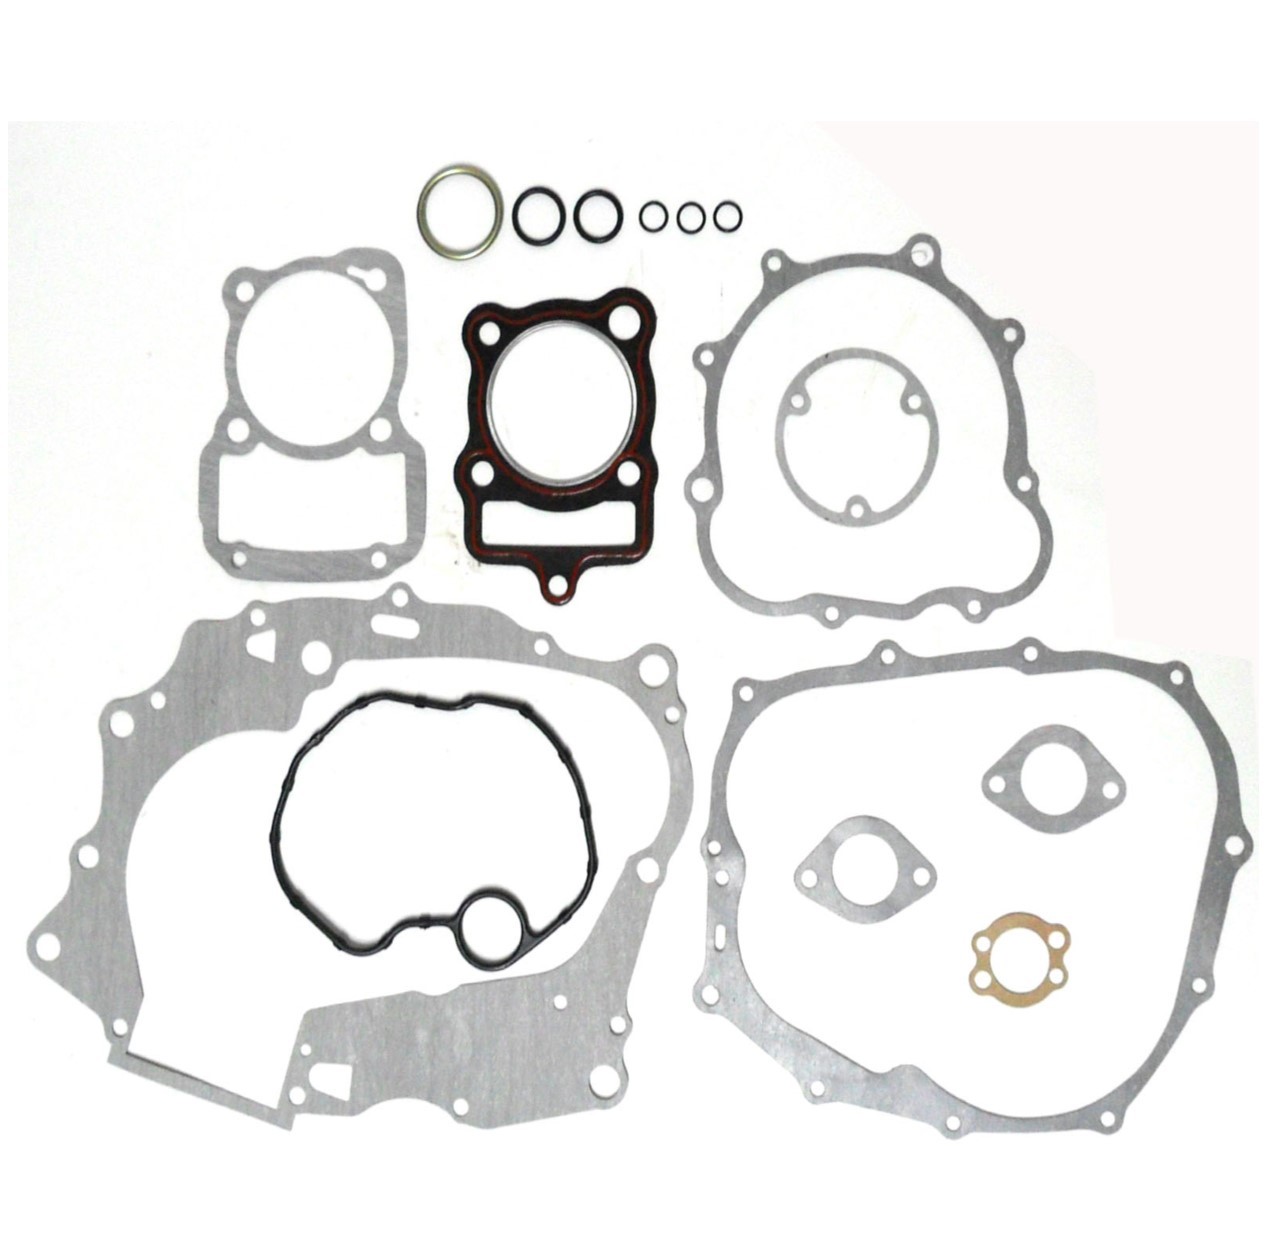 CG & YP Type Engines (125-250cc) Gaskets & Gasket Sets Fits Many ATVs-Motorcycles